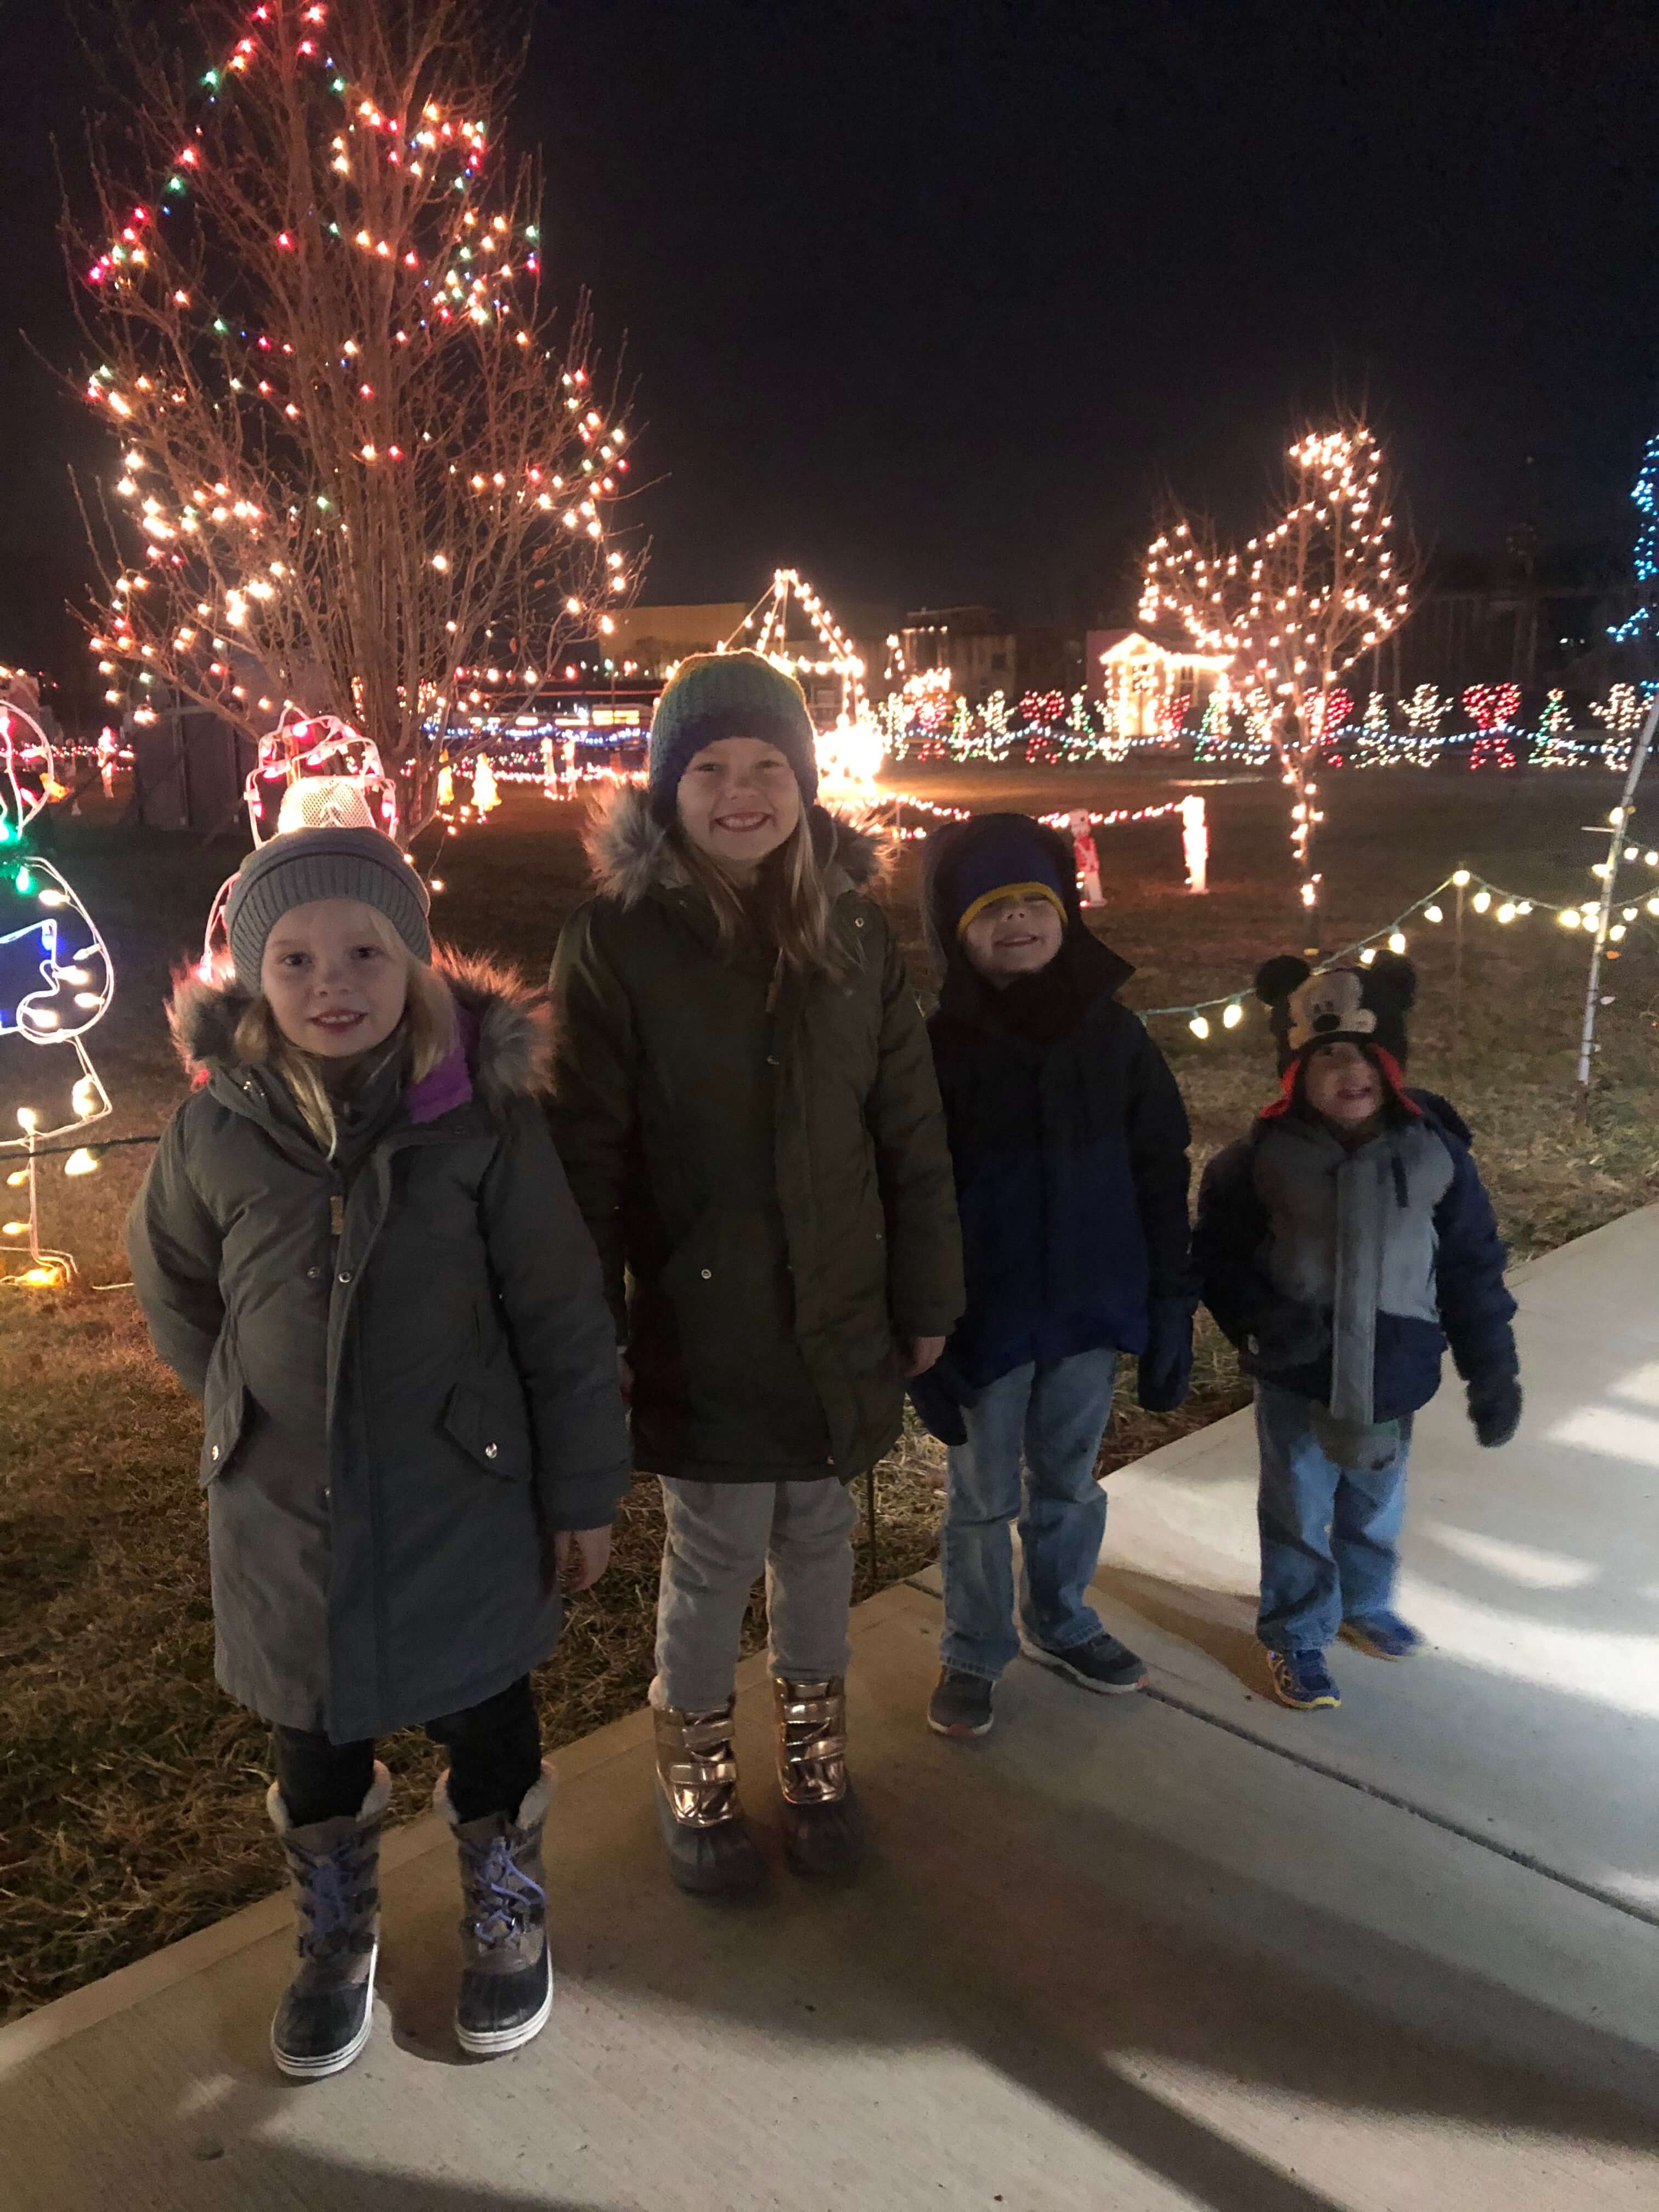 Visit Findlay director Alissa Preston shares her top ten favorite things about Findlay at Christmas, like WinterFest, luminaries, champagne, and tacos! • VisitFindlay.com